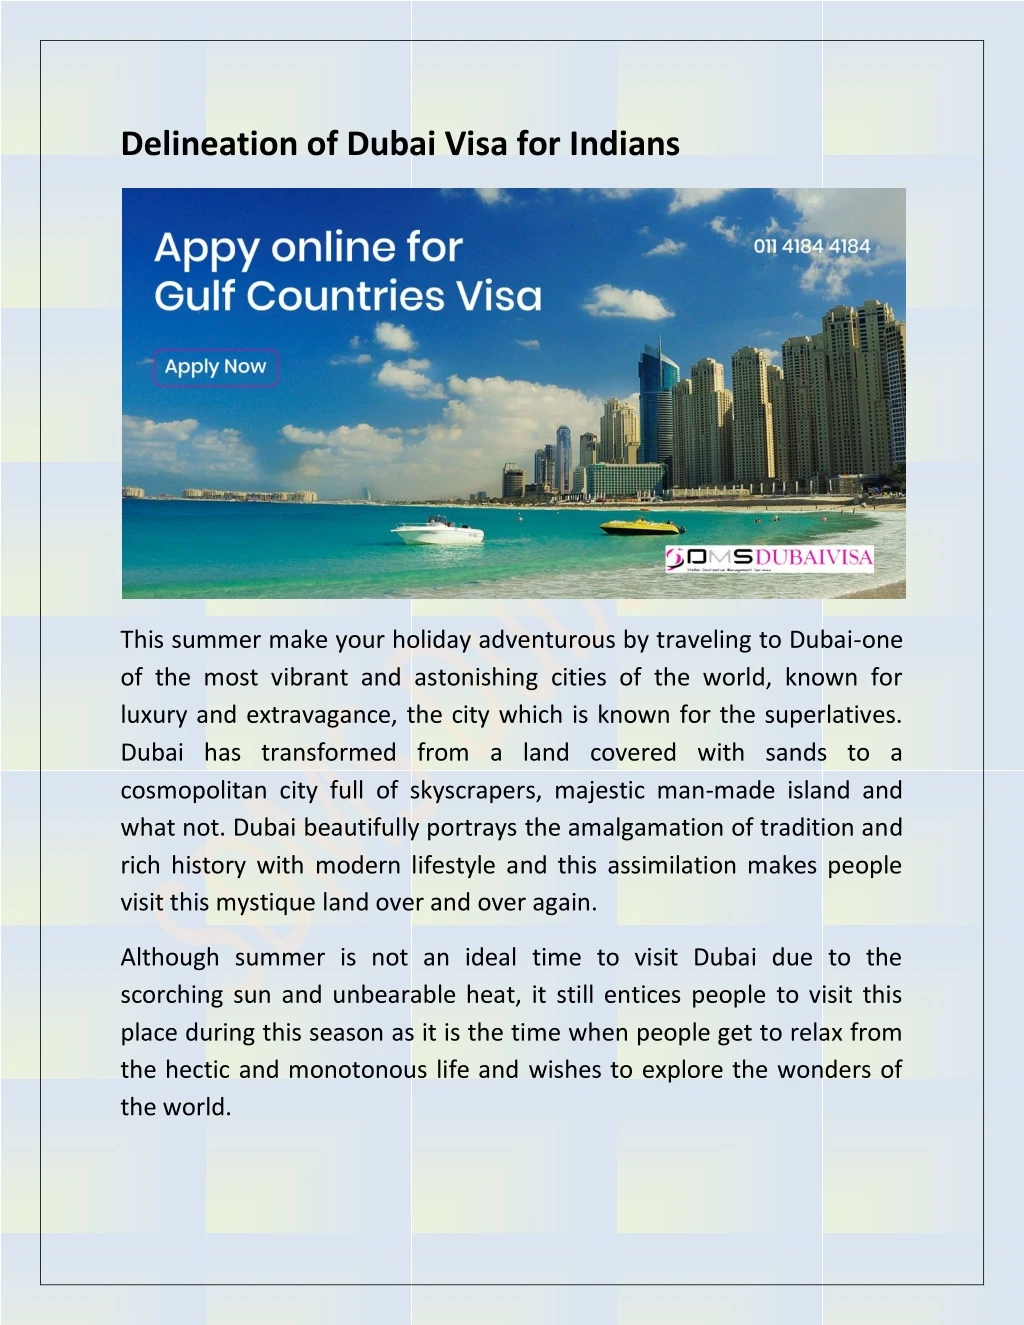 delineation of dubai visa for indians